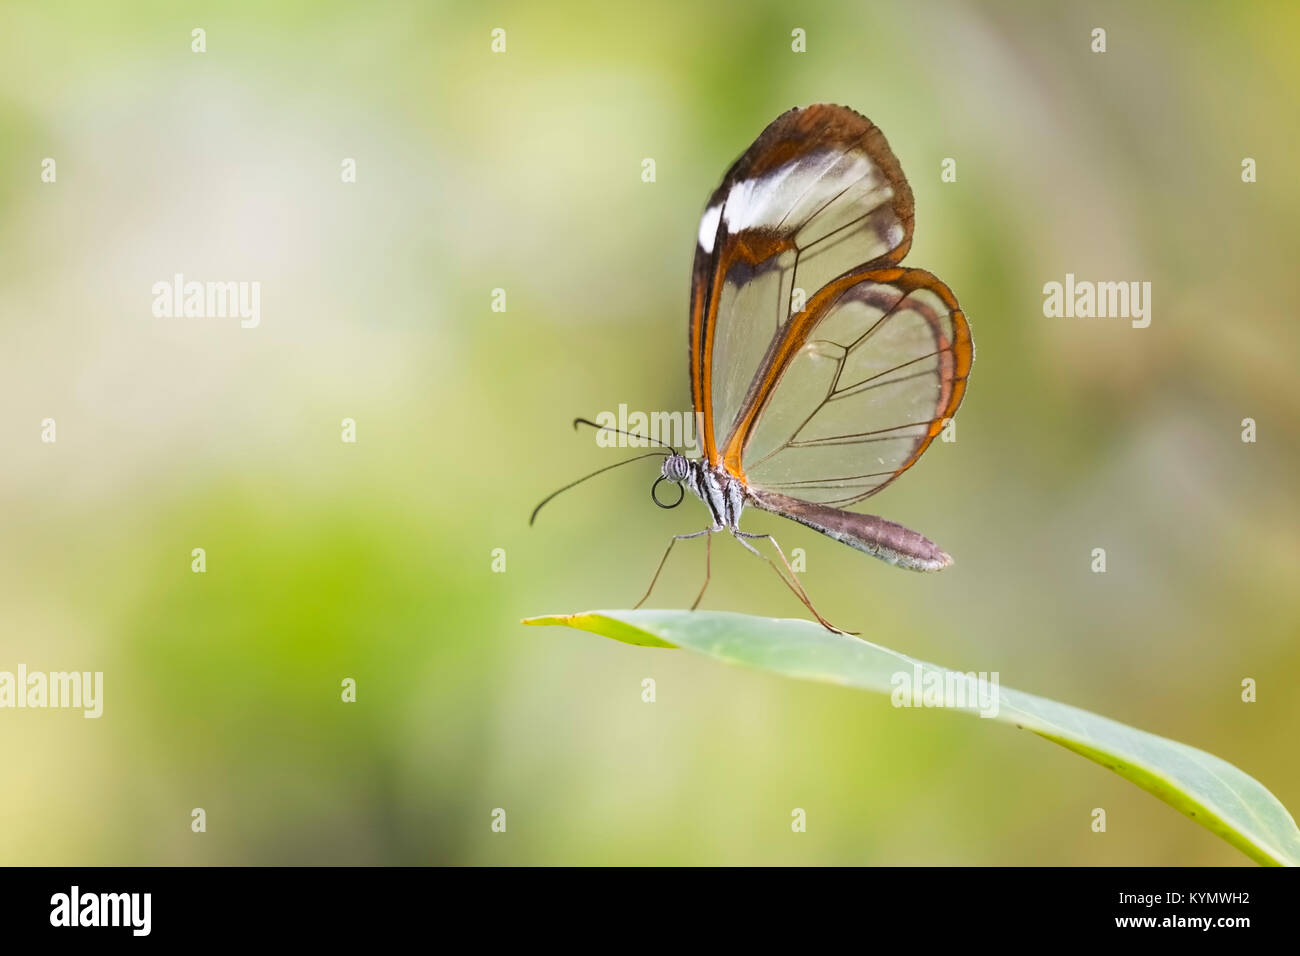 Close up portrait of a Greta oto, the glasswinged butterfly or glasswing. The background is brightly lit and vibrant colored. Stock Photo